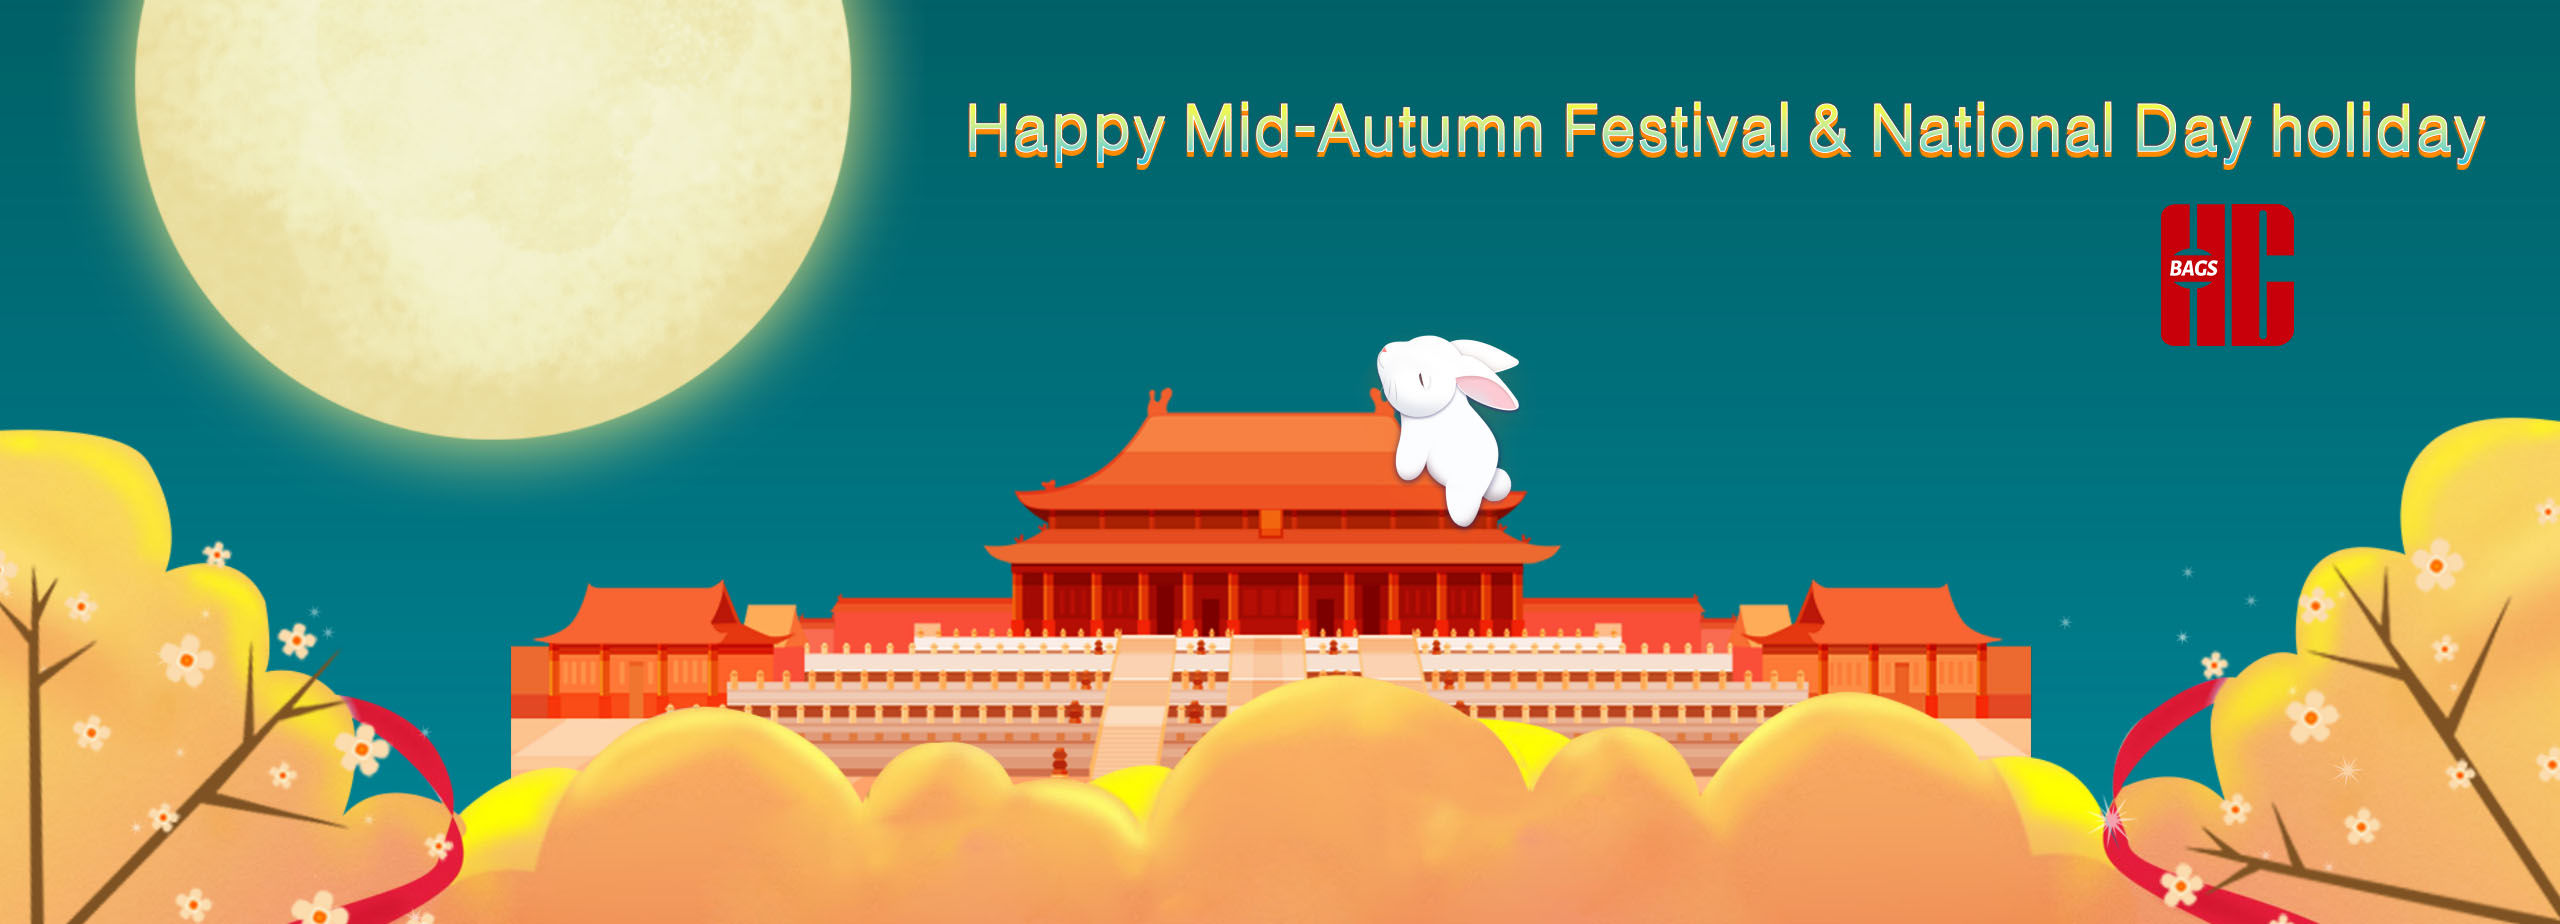 Happy Mid-Autumn Festival and National Day holiday